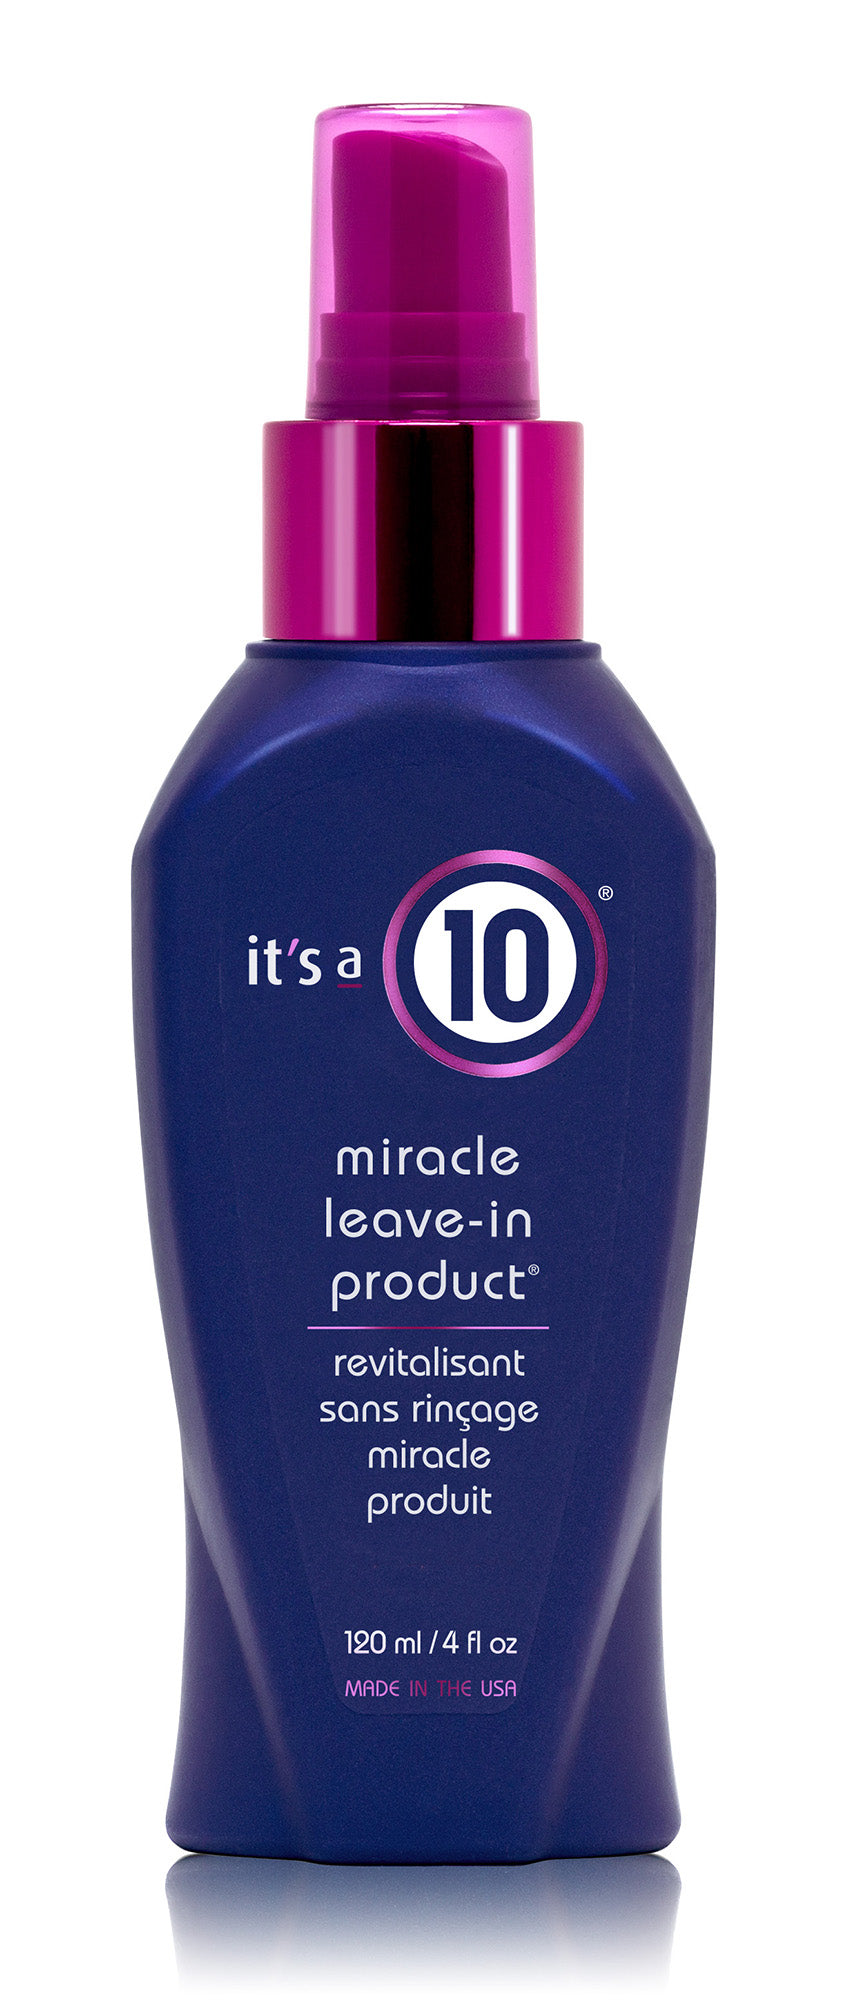 its a 10 miracle leave in product